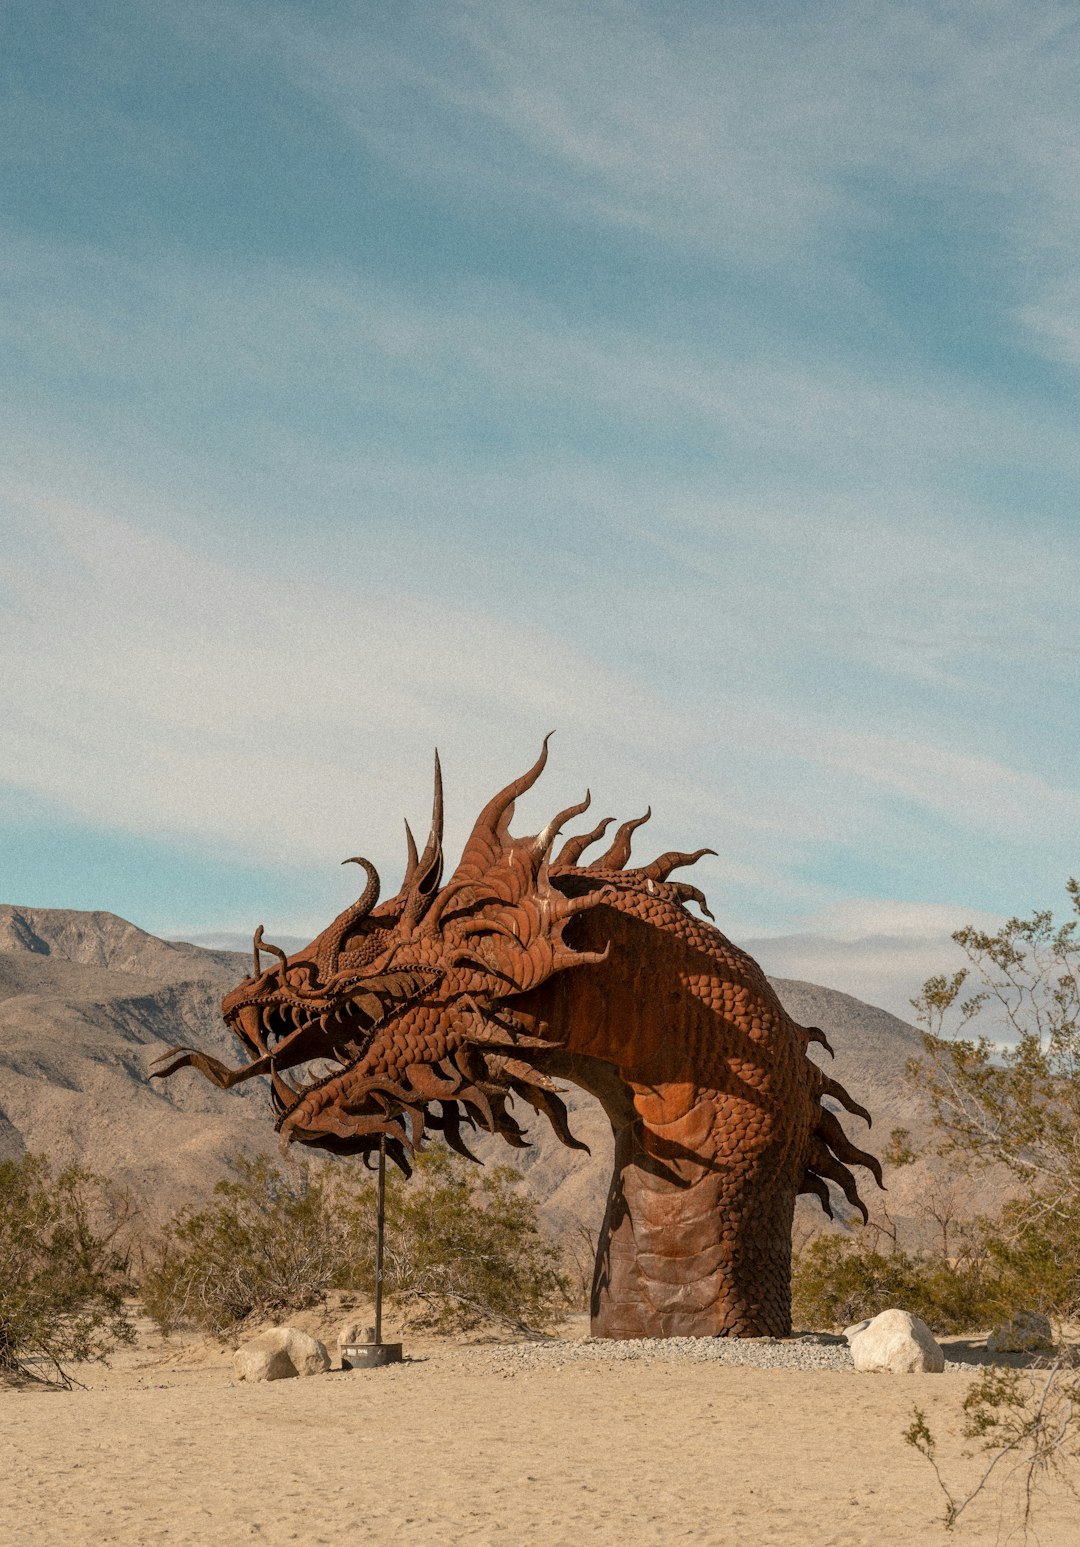 a statue of a dragon in the middle of a desert